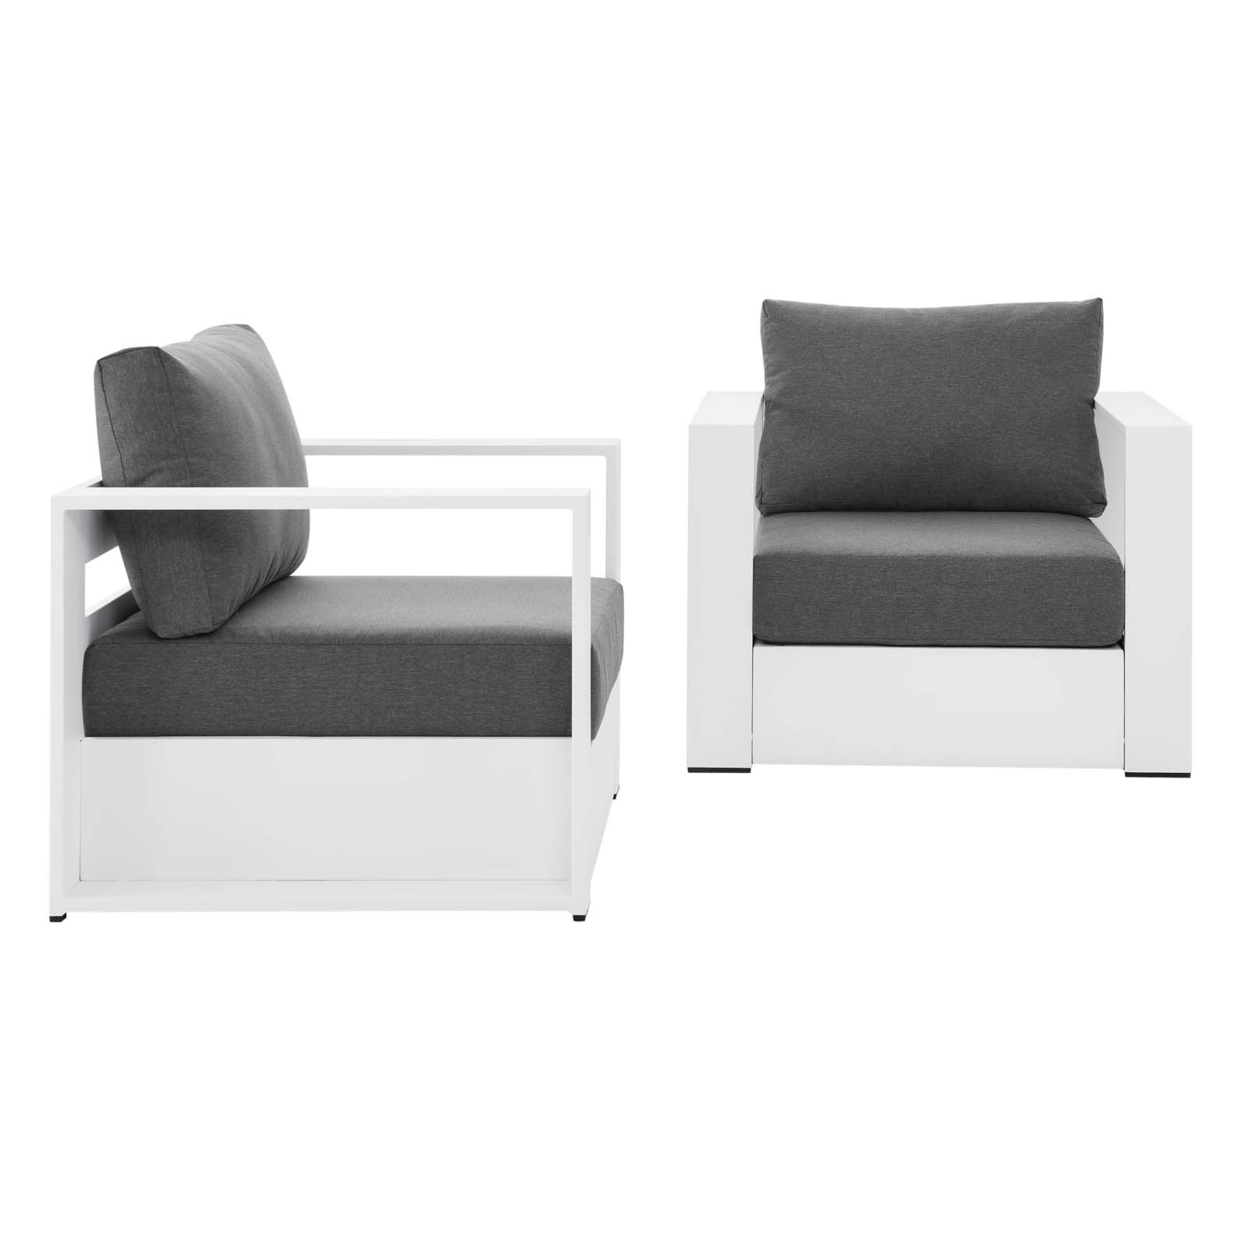 Tahoe Outdoor Patio Powder-Coated Aluminum 2-Piece Armchair Set, White Charcoal